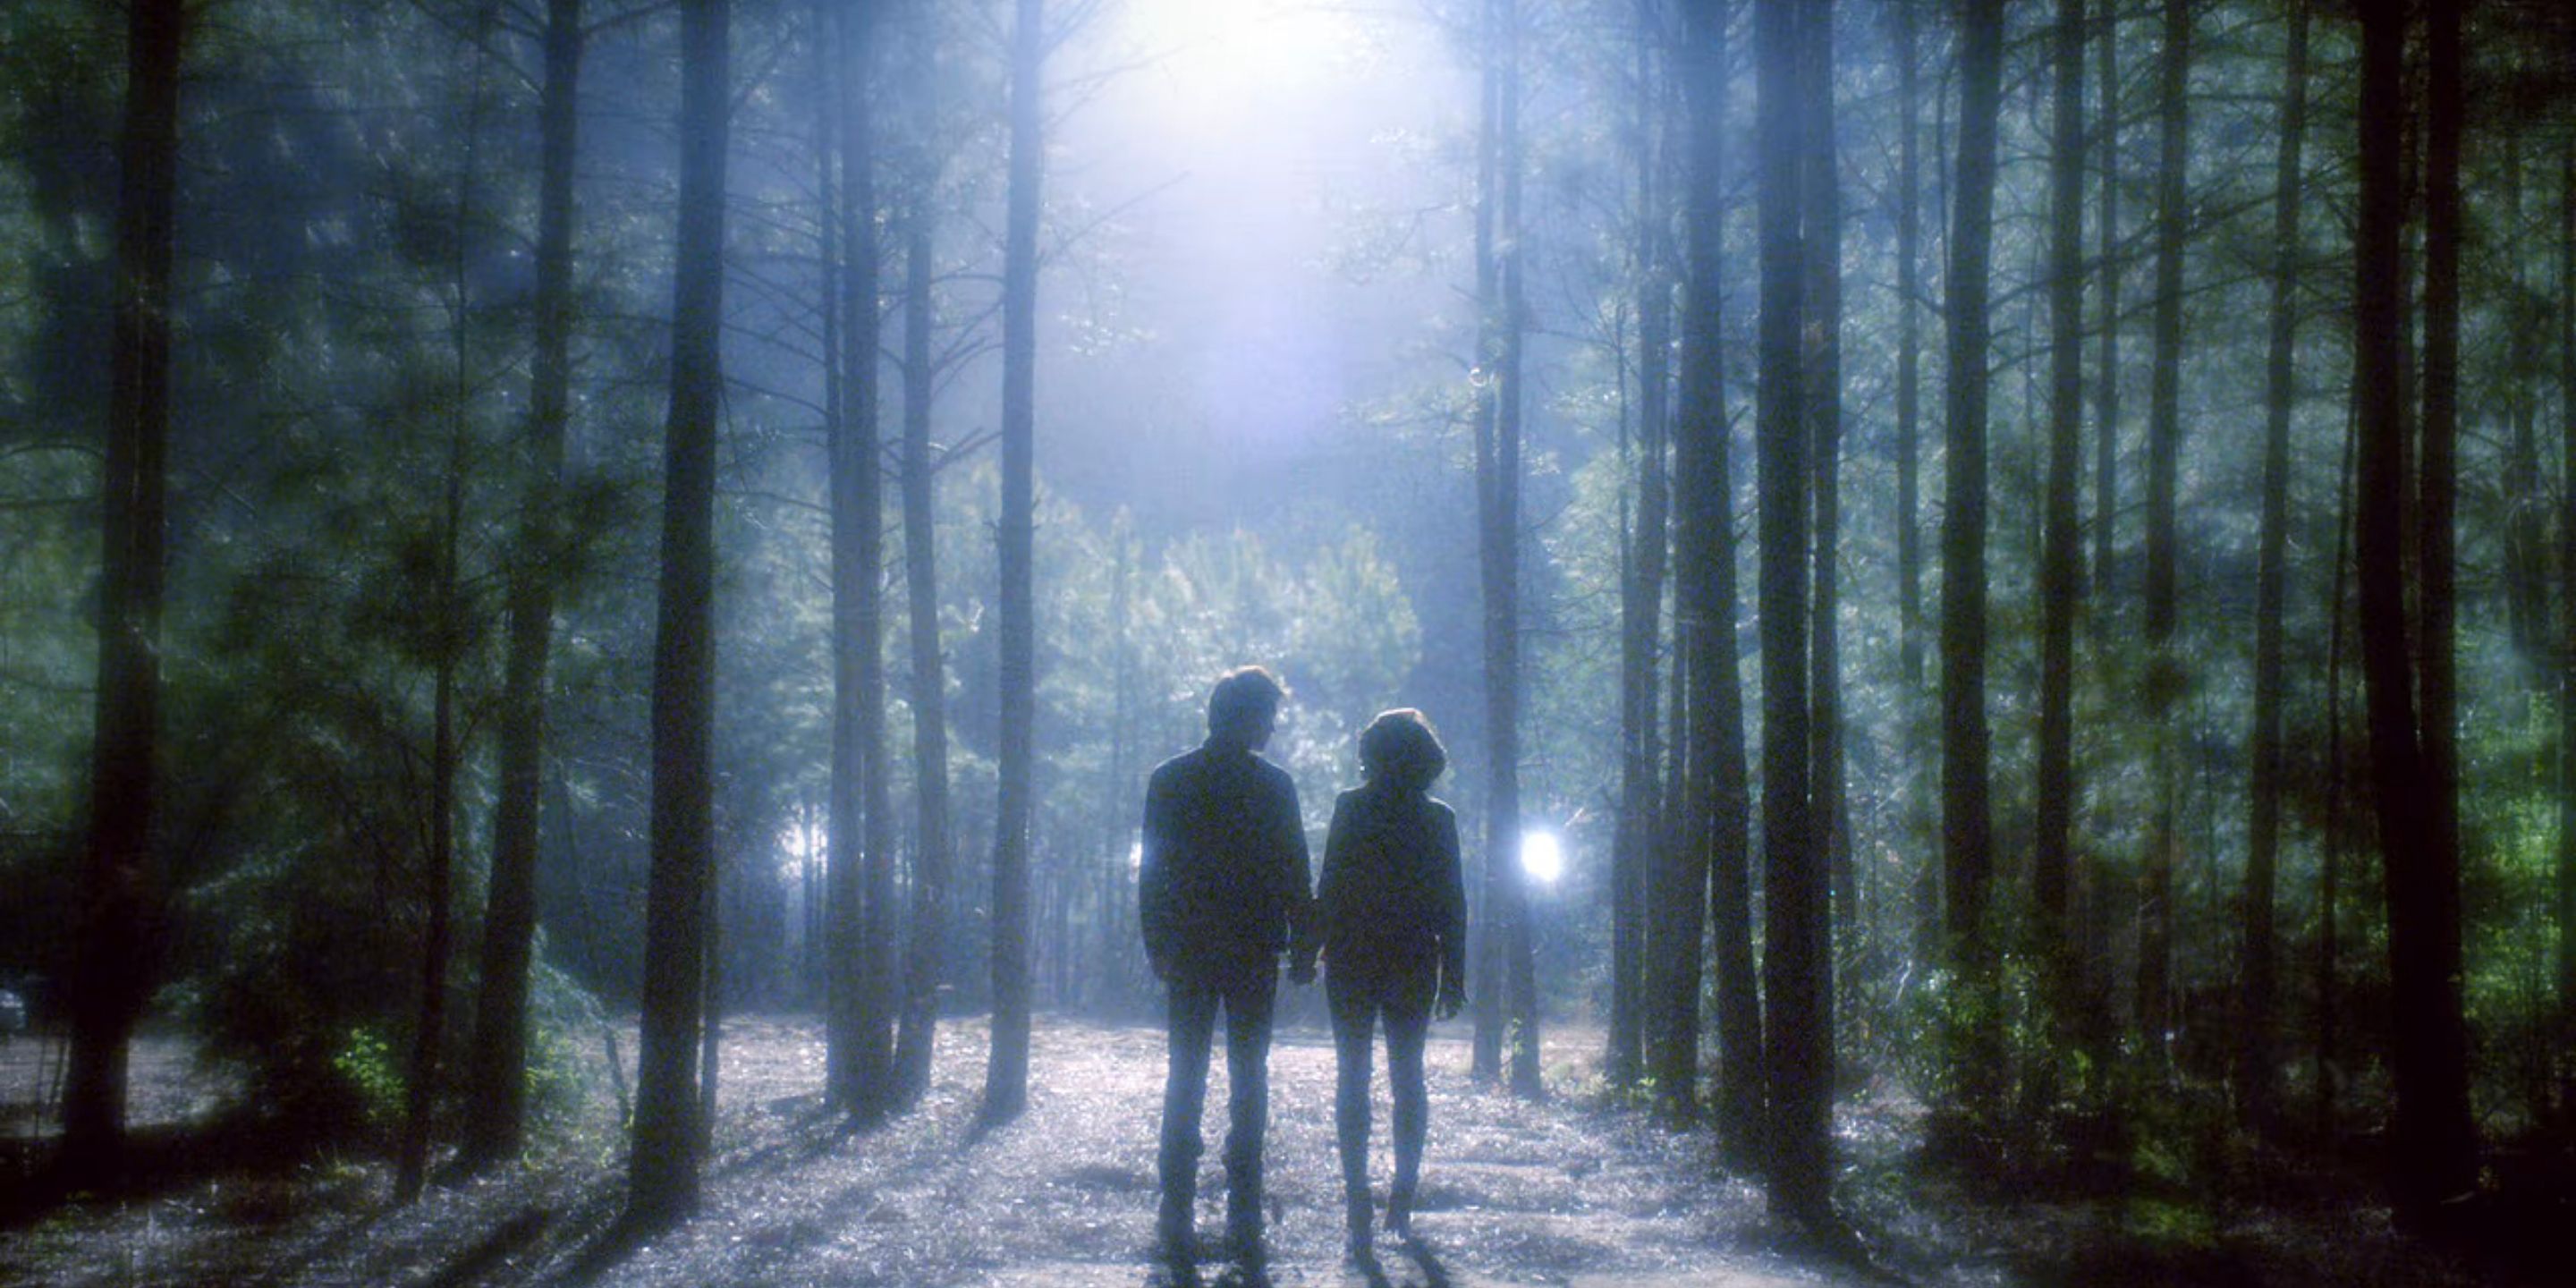 Bonnie and Damon hold hands in The Vampire Diaries.